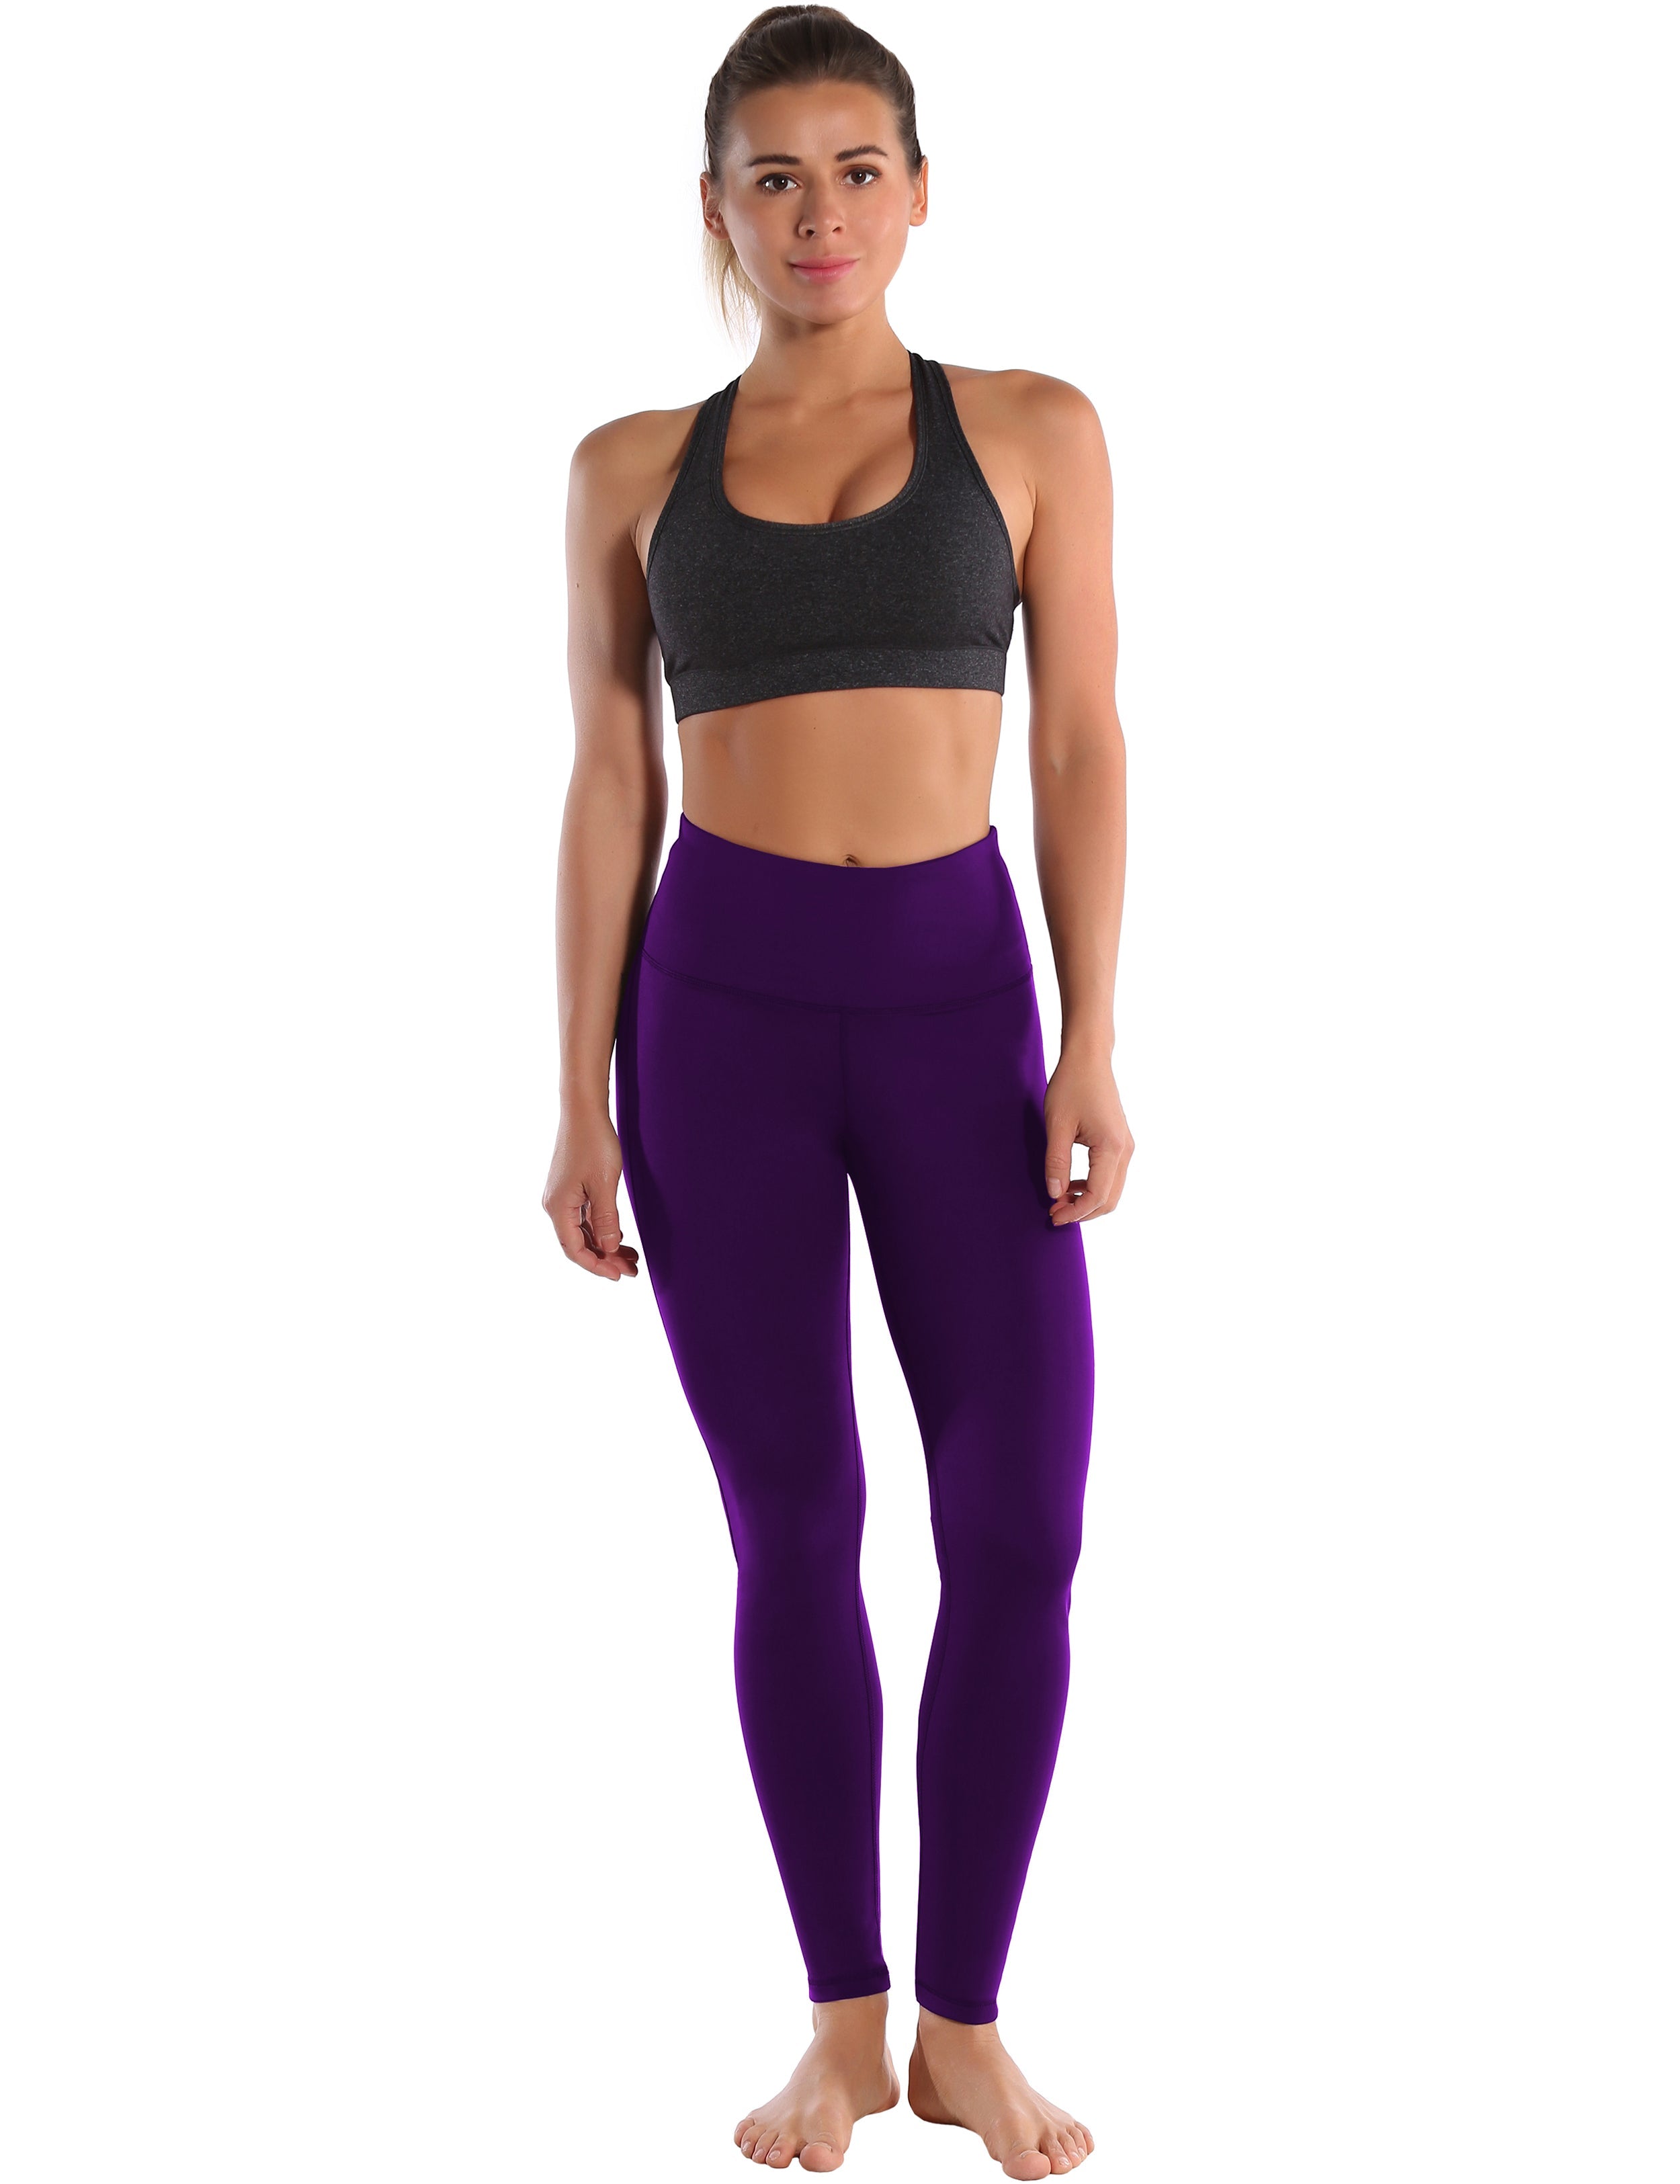 High Waist Side Line Biking Pants eggplantpurple Side Line is Make Your Legs Look Longer and Thinner 75%Nylon/25%Spandex Fabric doesn't attract lint easily 4-way stretch No see-through Moisture-wicking Tummy control Inner pocket Two lengths